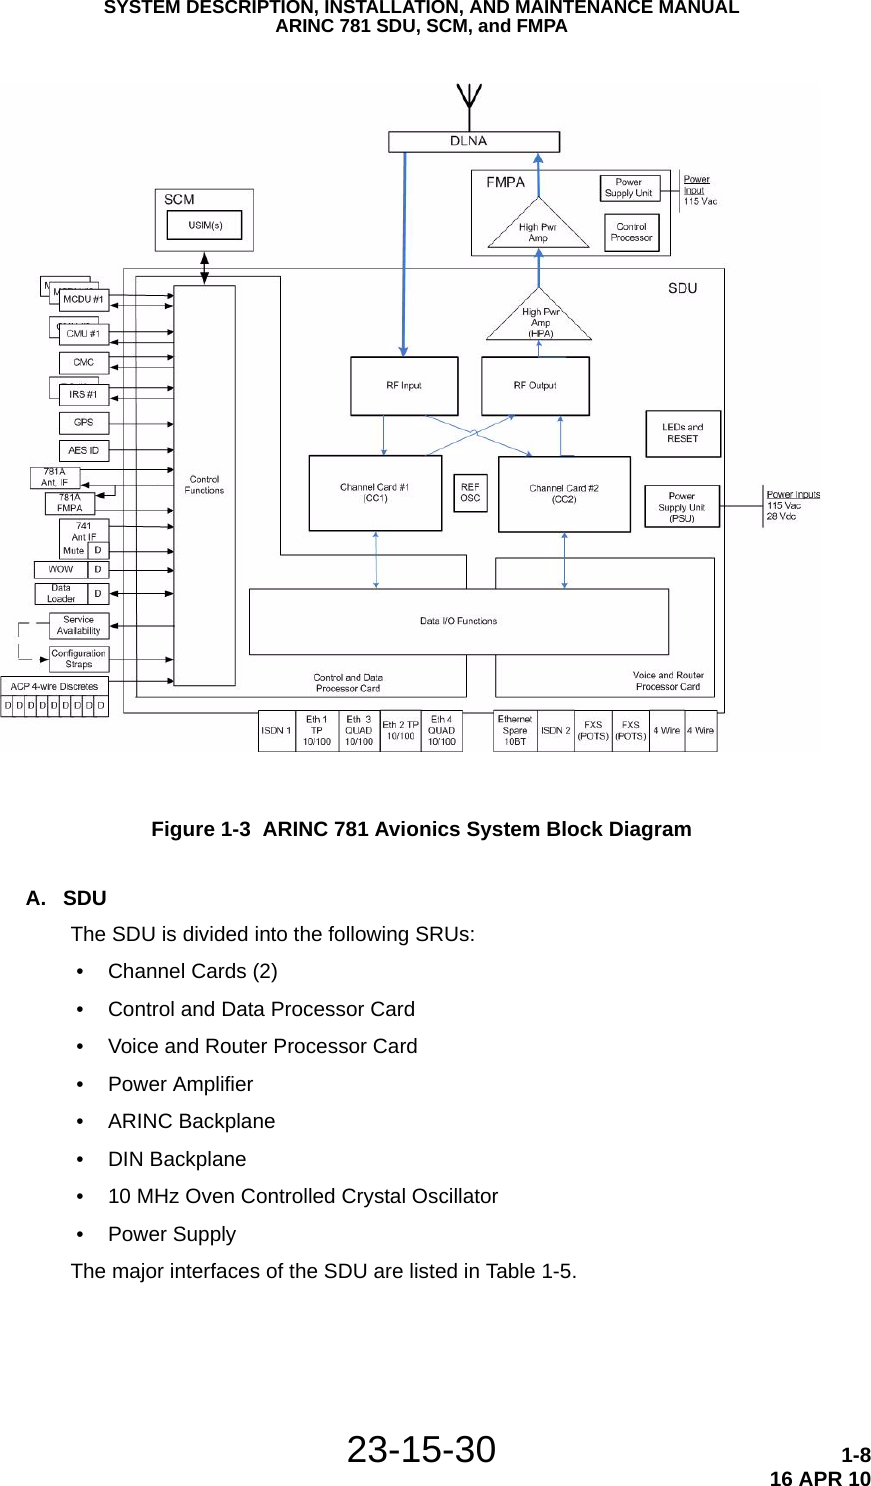 SYSTEM DESCRIPTION, INSTALLATION, AND MAINTENANCE MANUALARINC 781 SDU, SCM, and FMPA23-15-30 1-816 APR 10Figure 1-3  ARINC 781 Avionics System Block DiagramA. SDUThe SDU is divided into the following SRUs: • Channel Cards (2) • Control and Data Processor Card • Voice and Router Processor Card • Power Amplifier • ARINC Backplane • DIN Backplane • 10 MHz Oven Controlled Crystal Oscillator • Power SupplyThe major interfaces of the SDU are listed in Table 1-5.